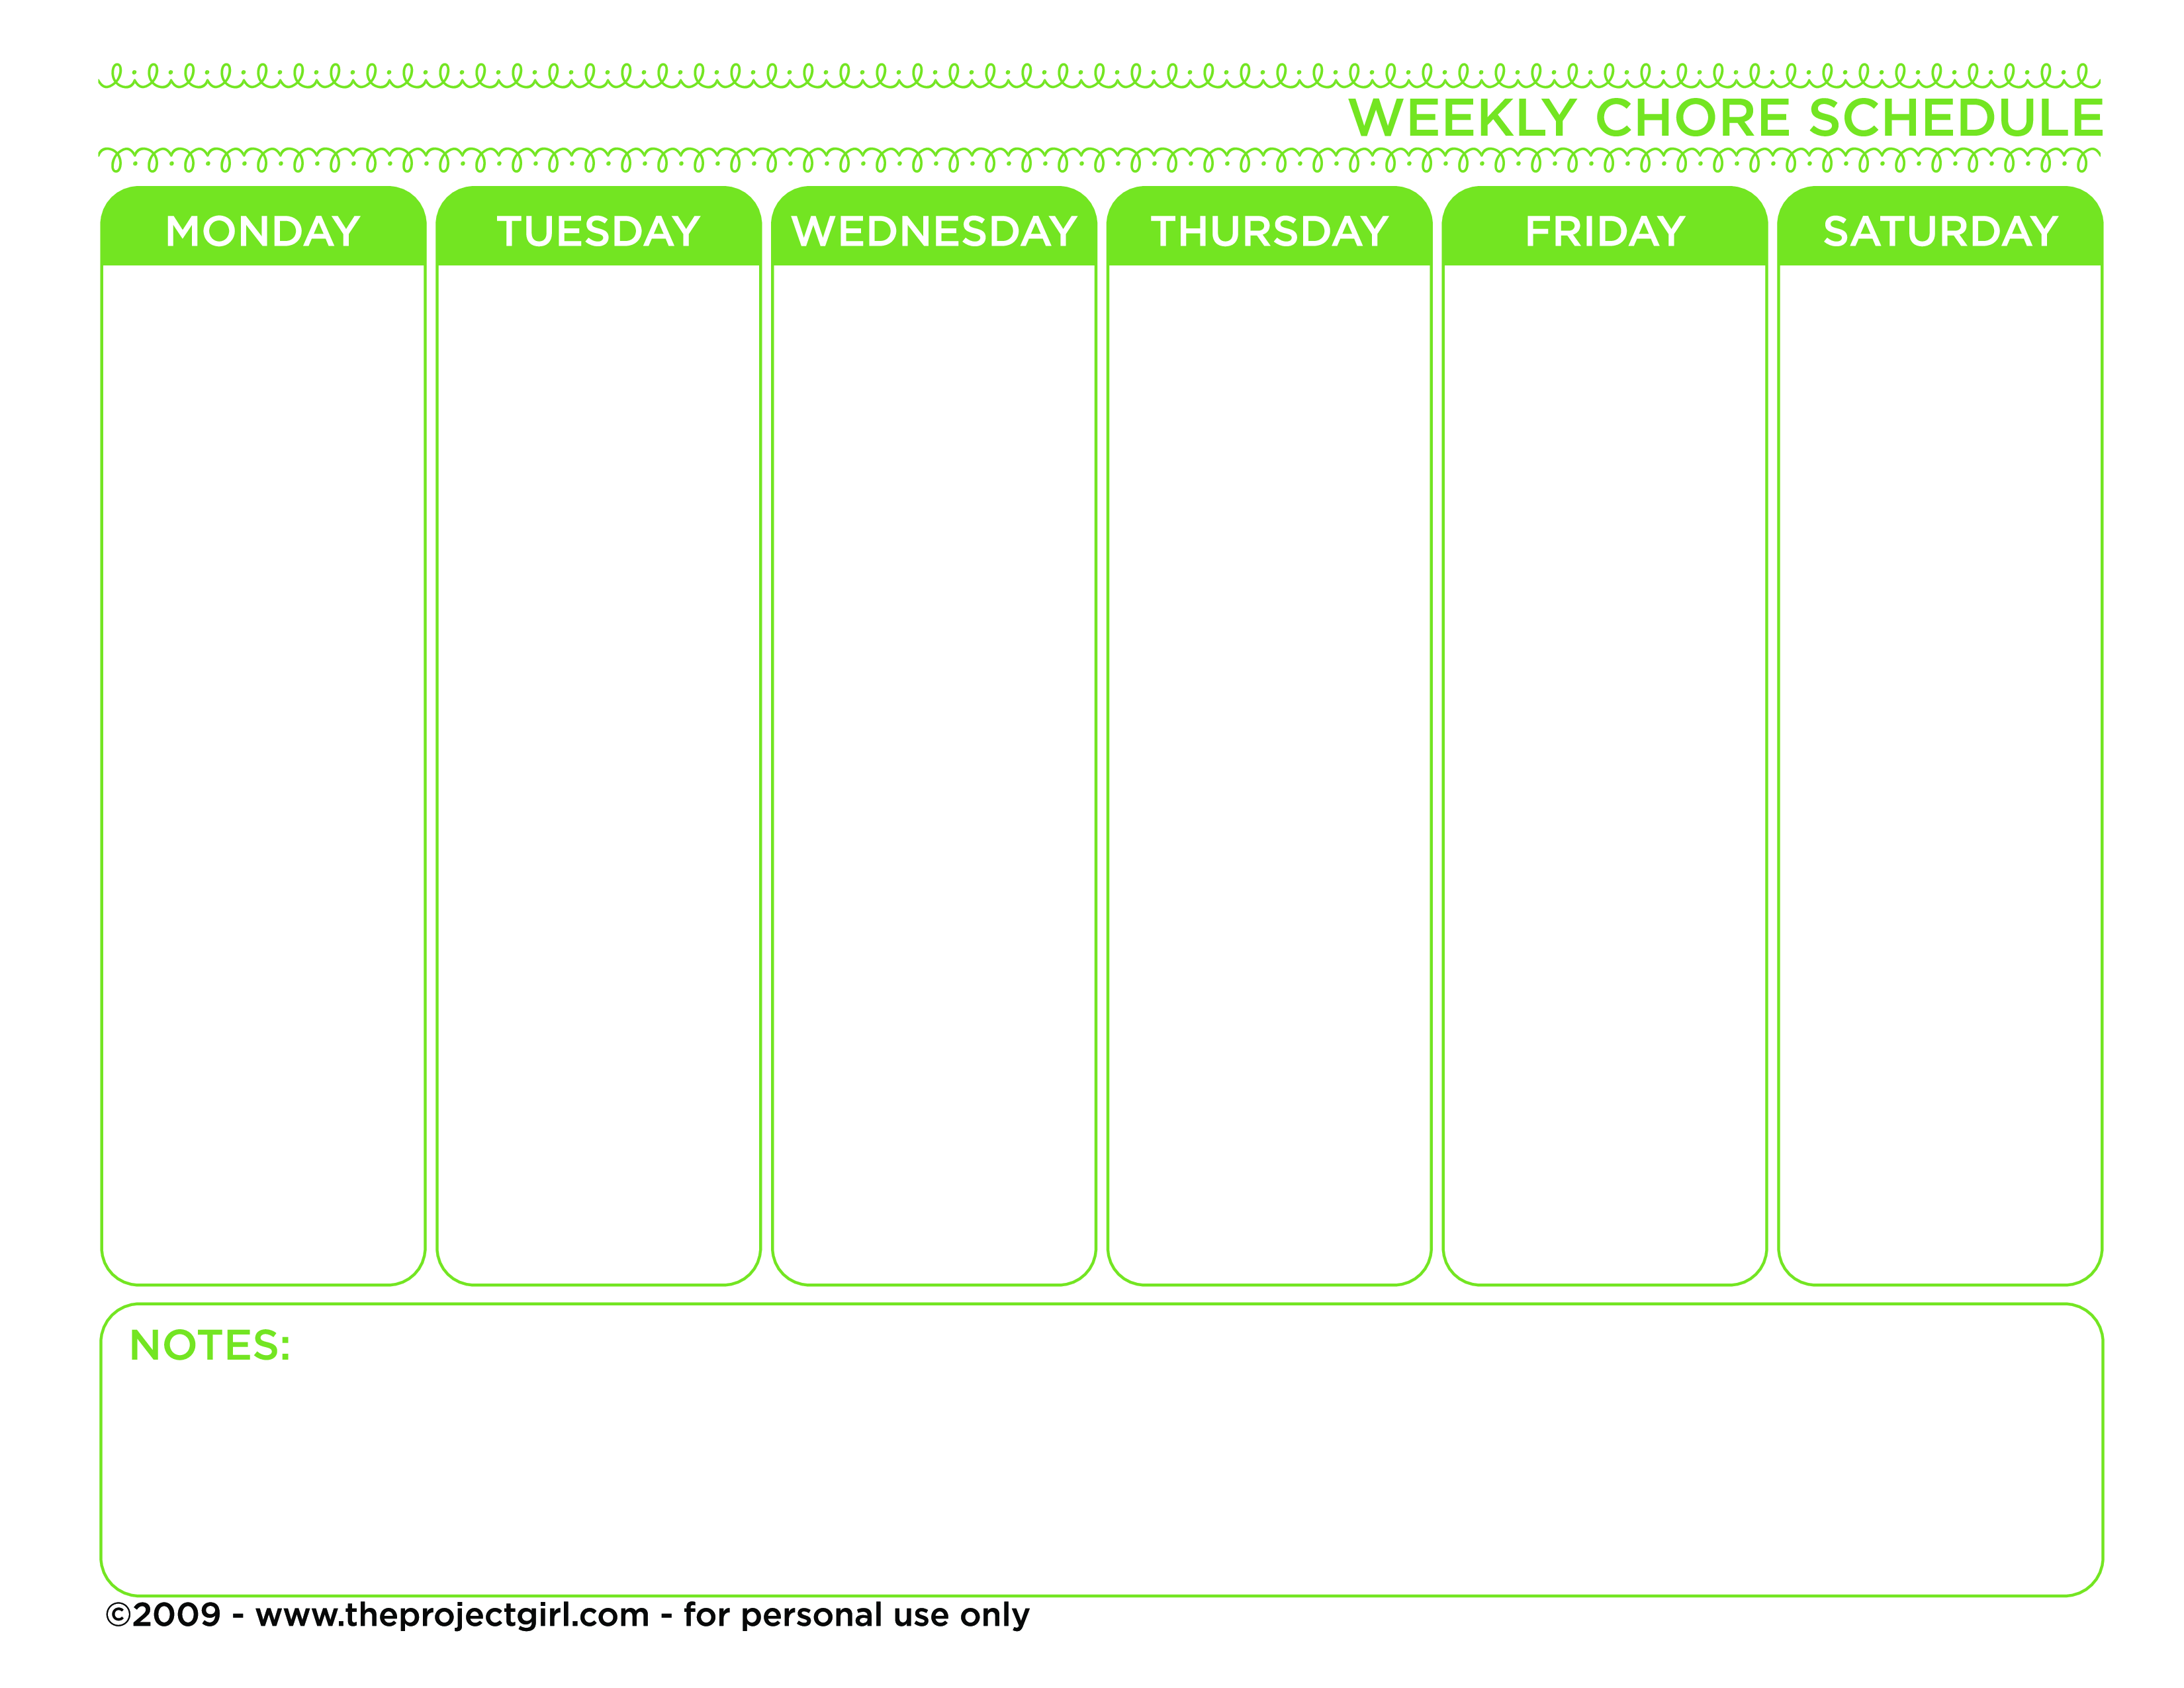 Weekly Chore Schedule Templates At Allbusinesstemplates